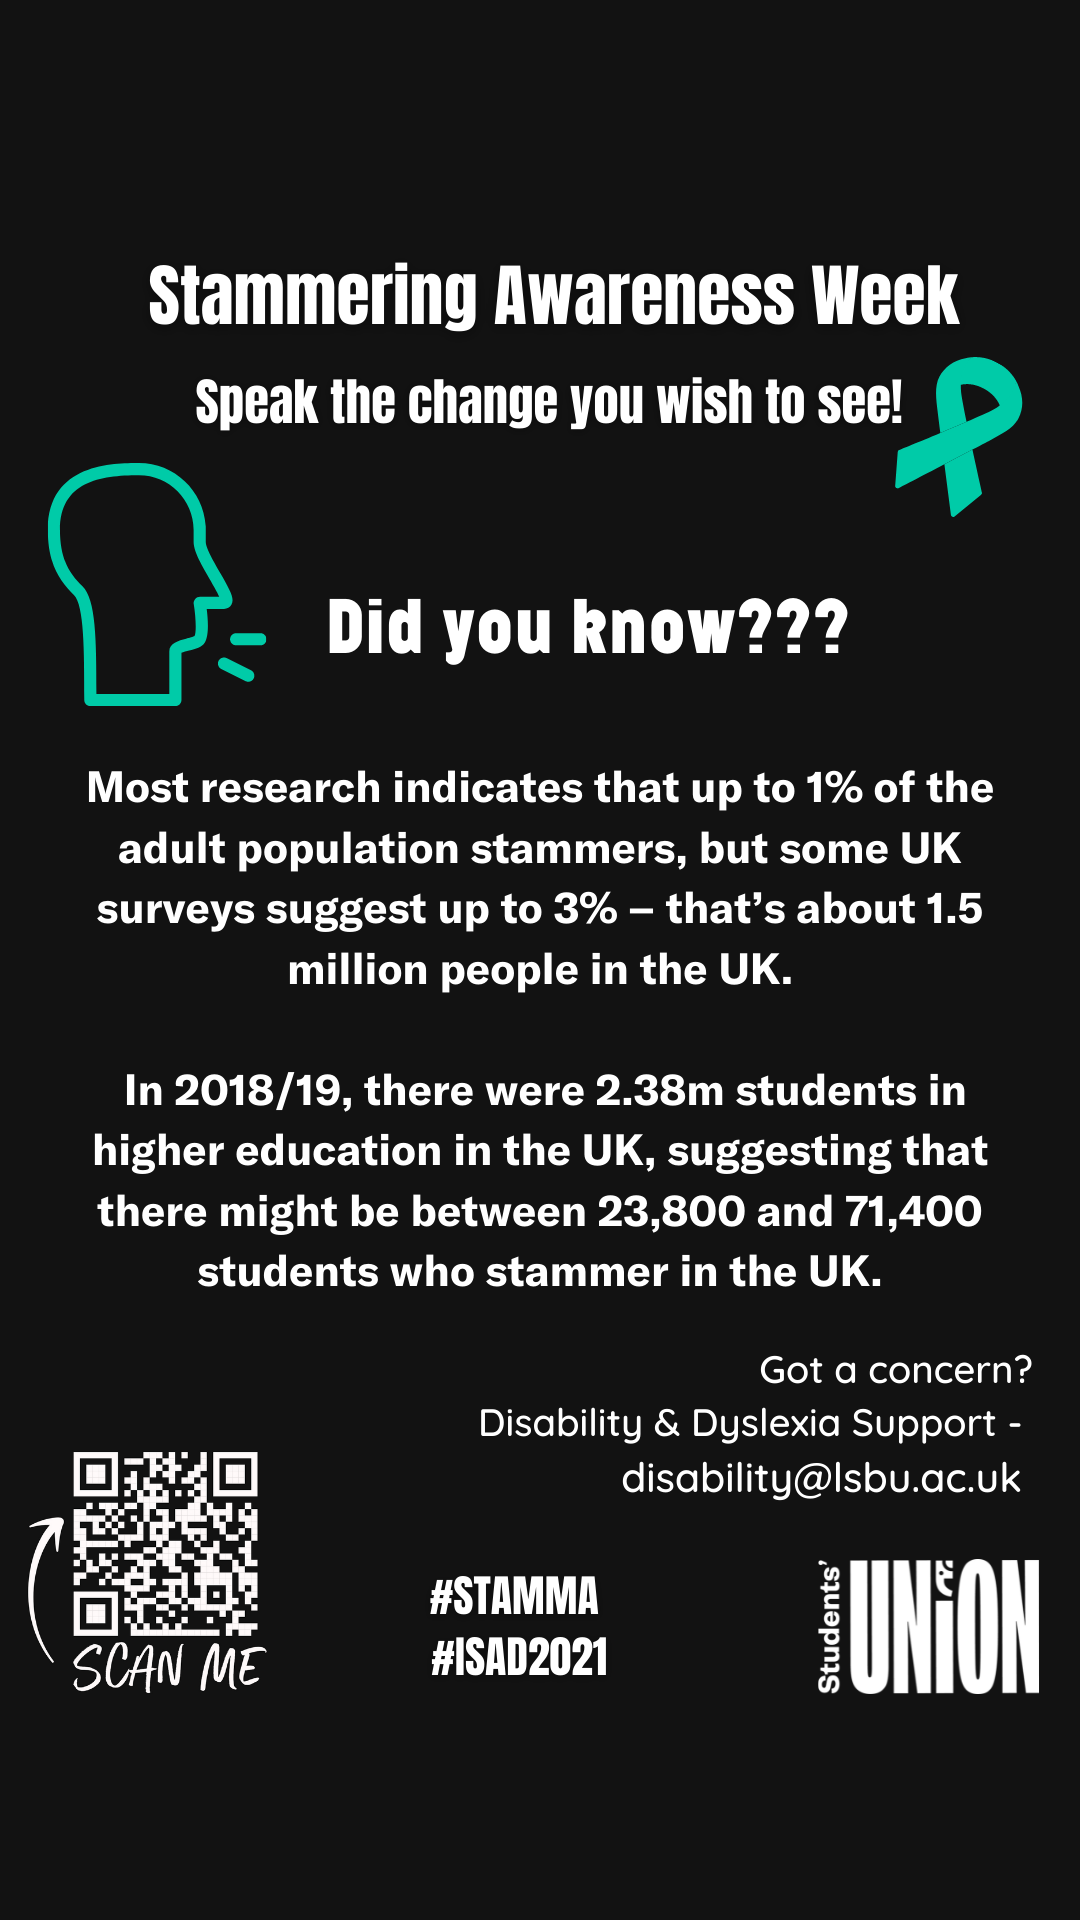 Statistic on Stammering poster: Most research indicates that up to 1% of the adult population stammers, but some UK surveys suggest up to 3% – that’s about 1.5 million people in the UK. In 2018/19, there were 2.38m students in higher education in the UK, suggesting that there might be between 23,800 and 71,400 students who stammer in the UK.